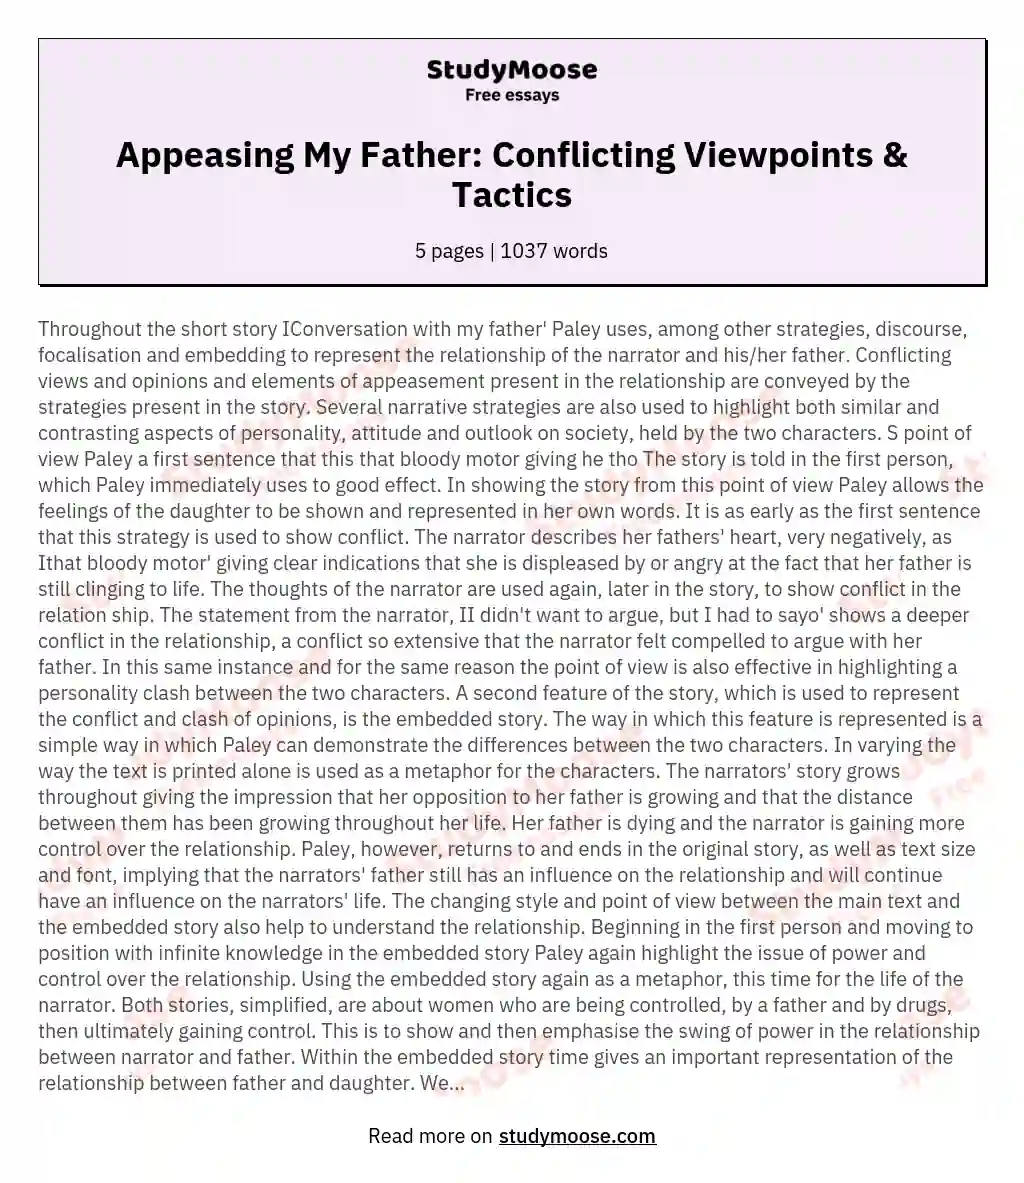 Appeasing My Father: Conflicting Viewpoints & Tactics essay